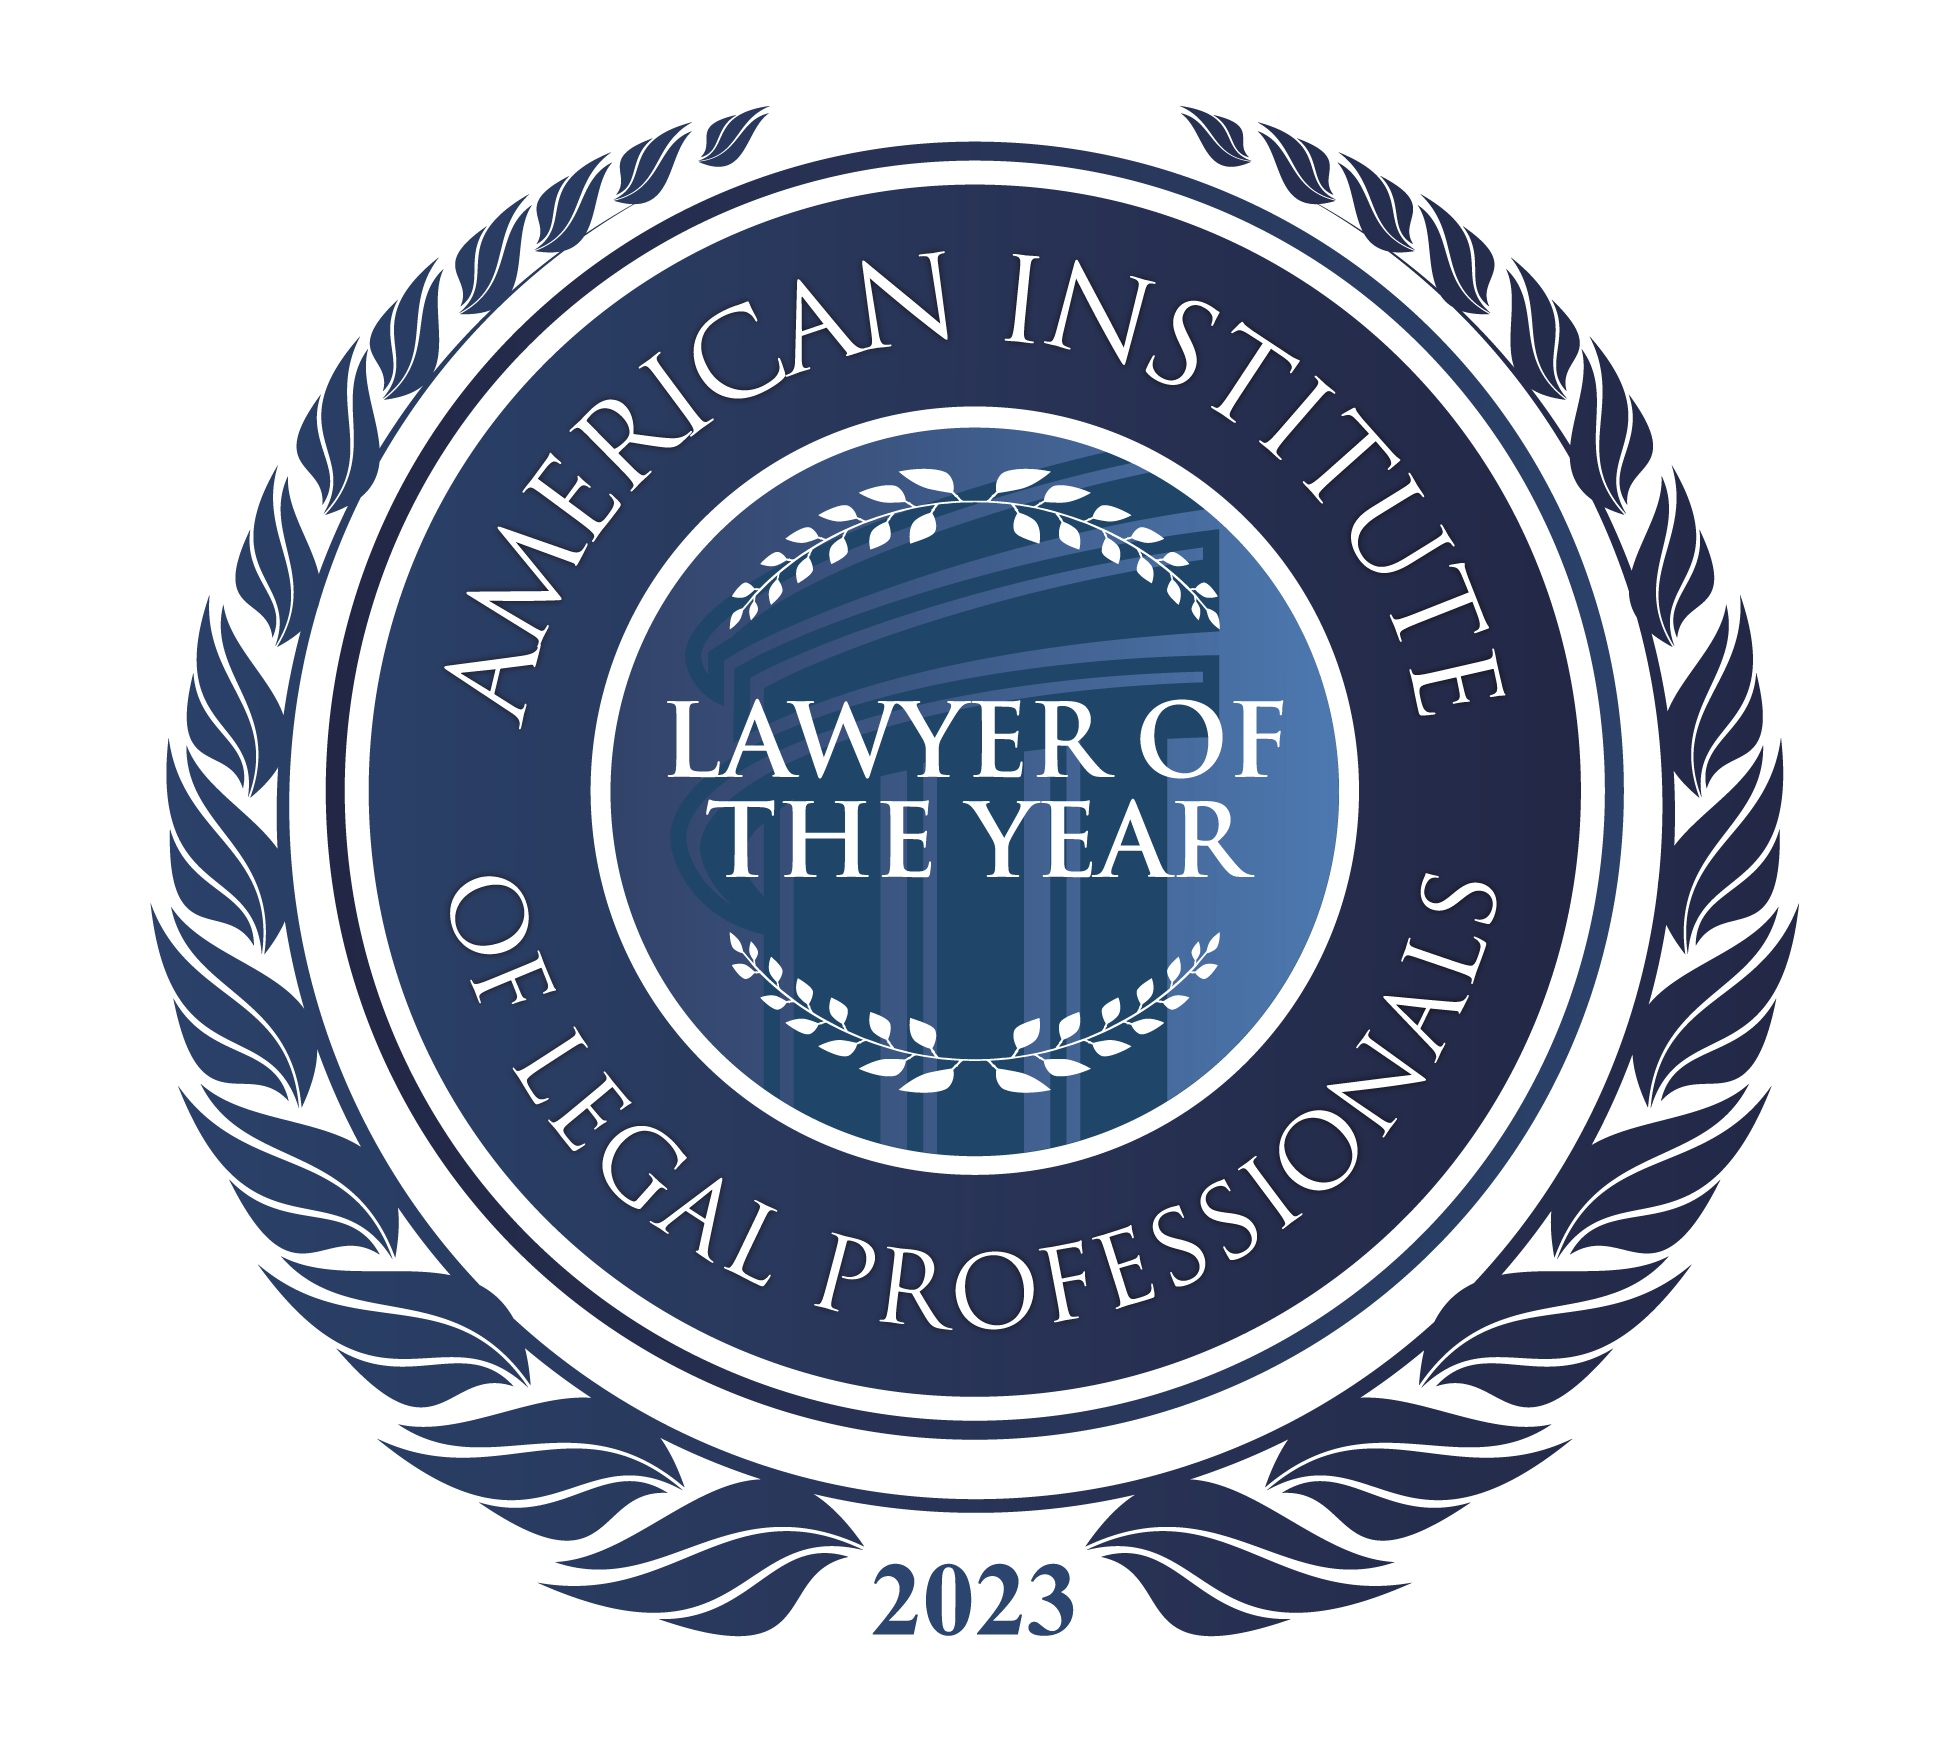 American Institute of Legal Professionals - 2023 Lawyer of the Year